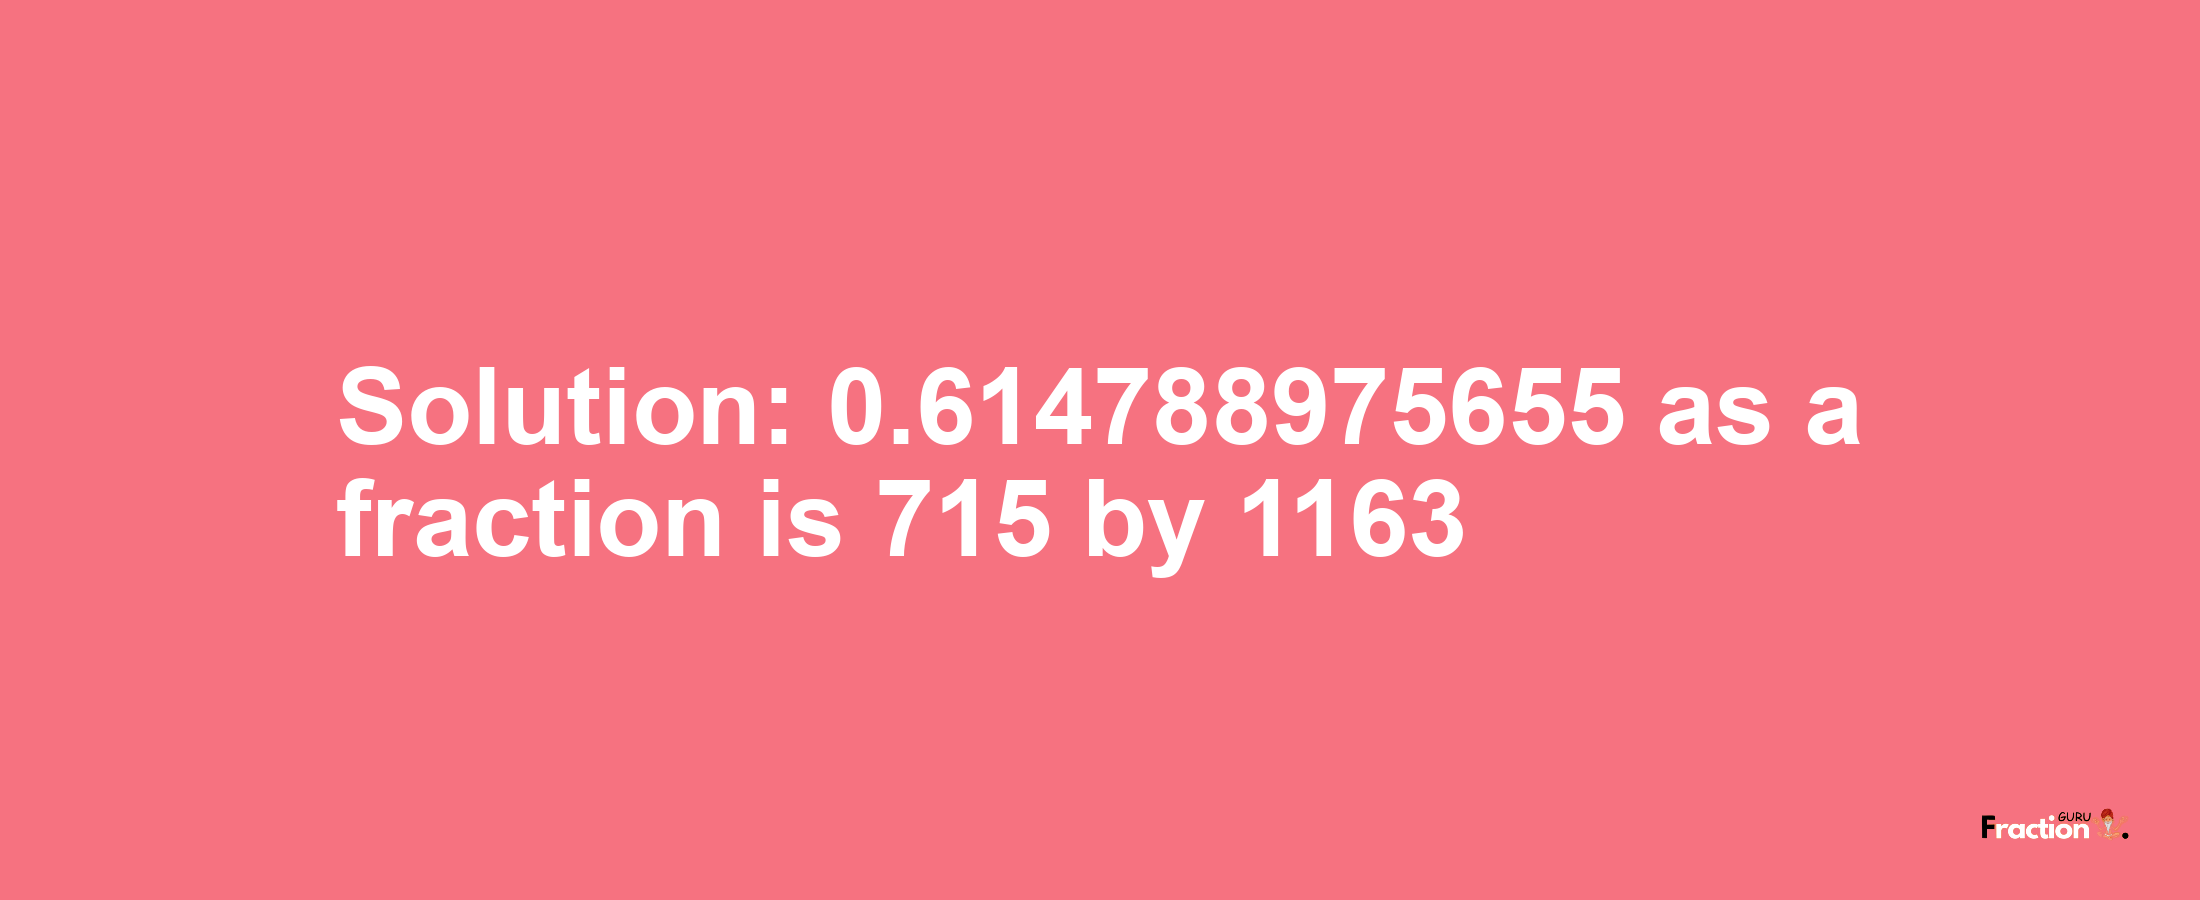 Solution:0.614788975655 as a fraction is 715/1163